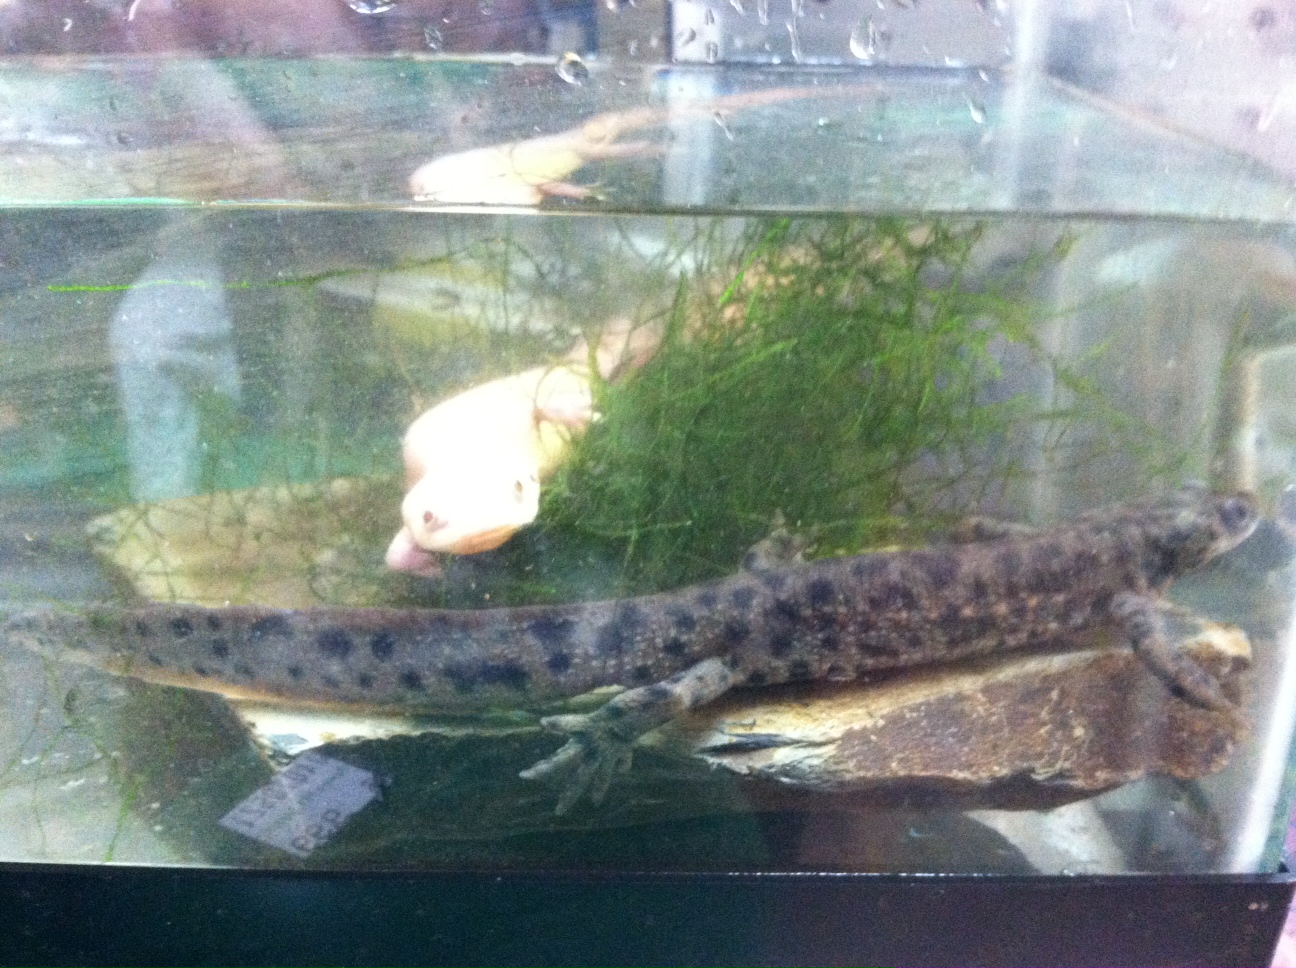 large ribbed newt swimming in tank